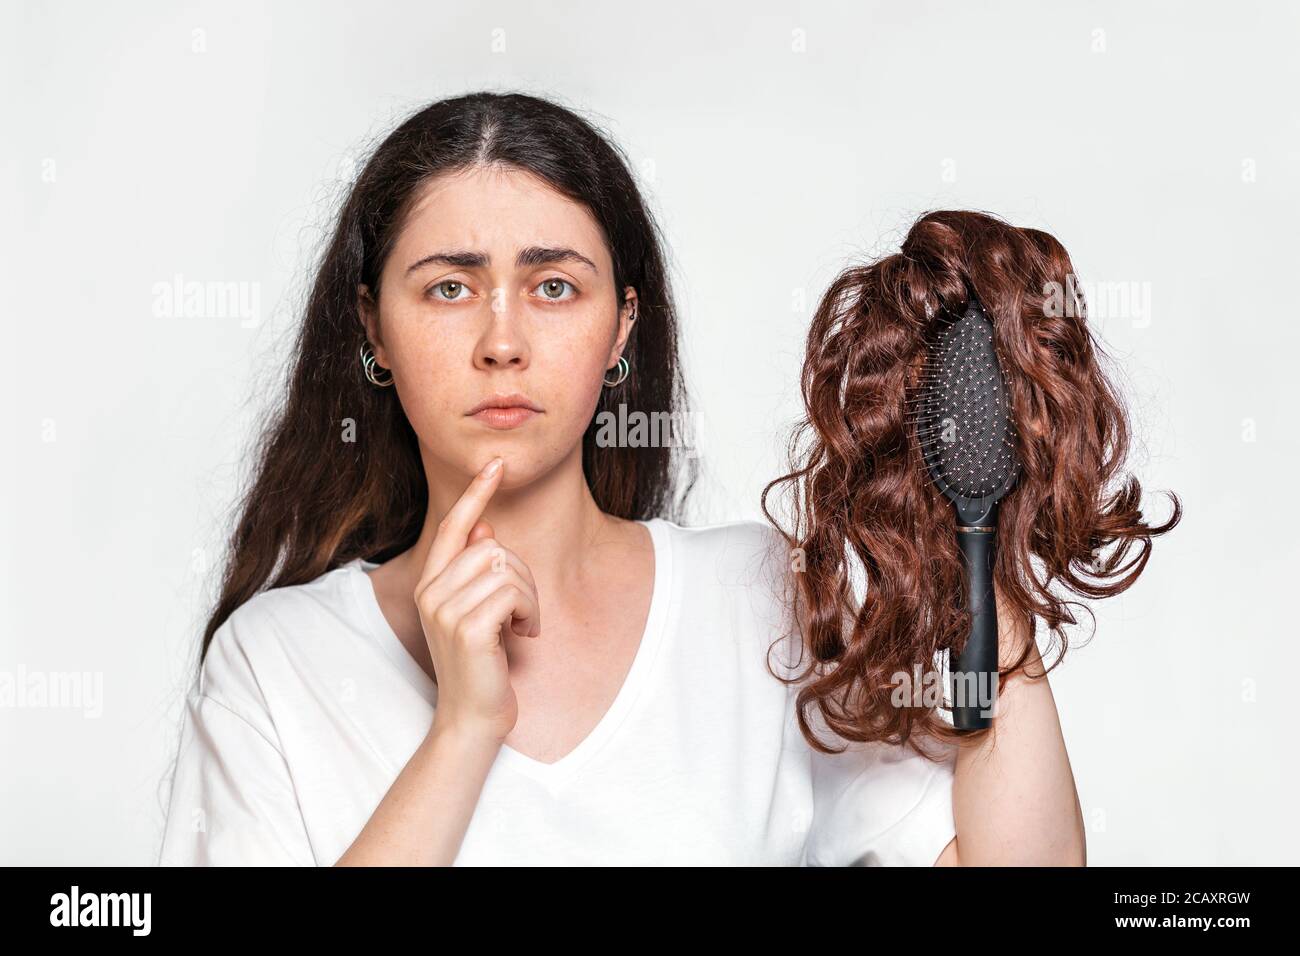 Portrait of a sad woman holds a comb with a wig on it. White background. Concept of hair care and hair loss. Stock Photo